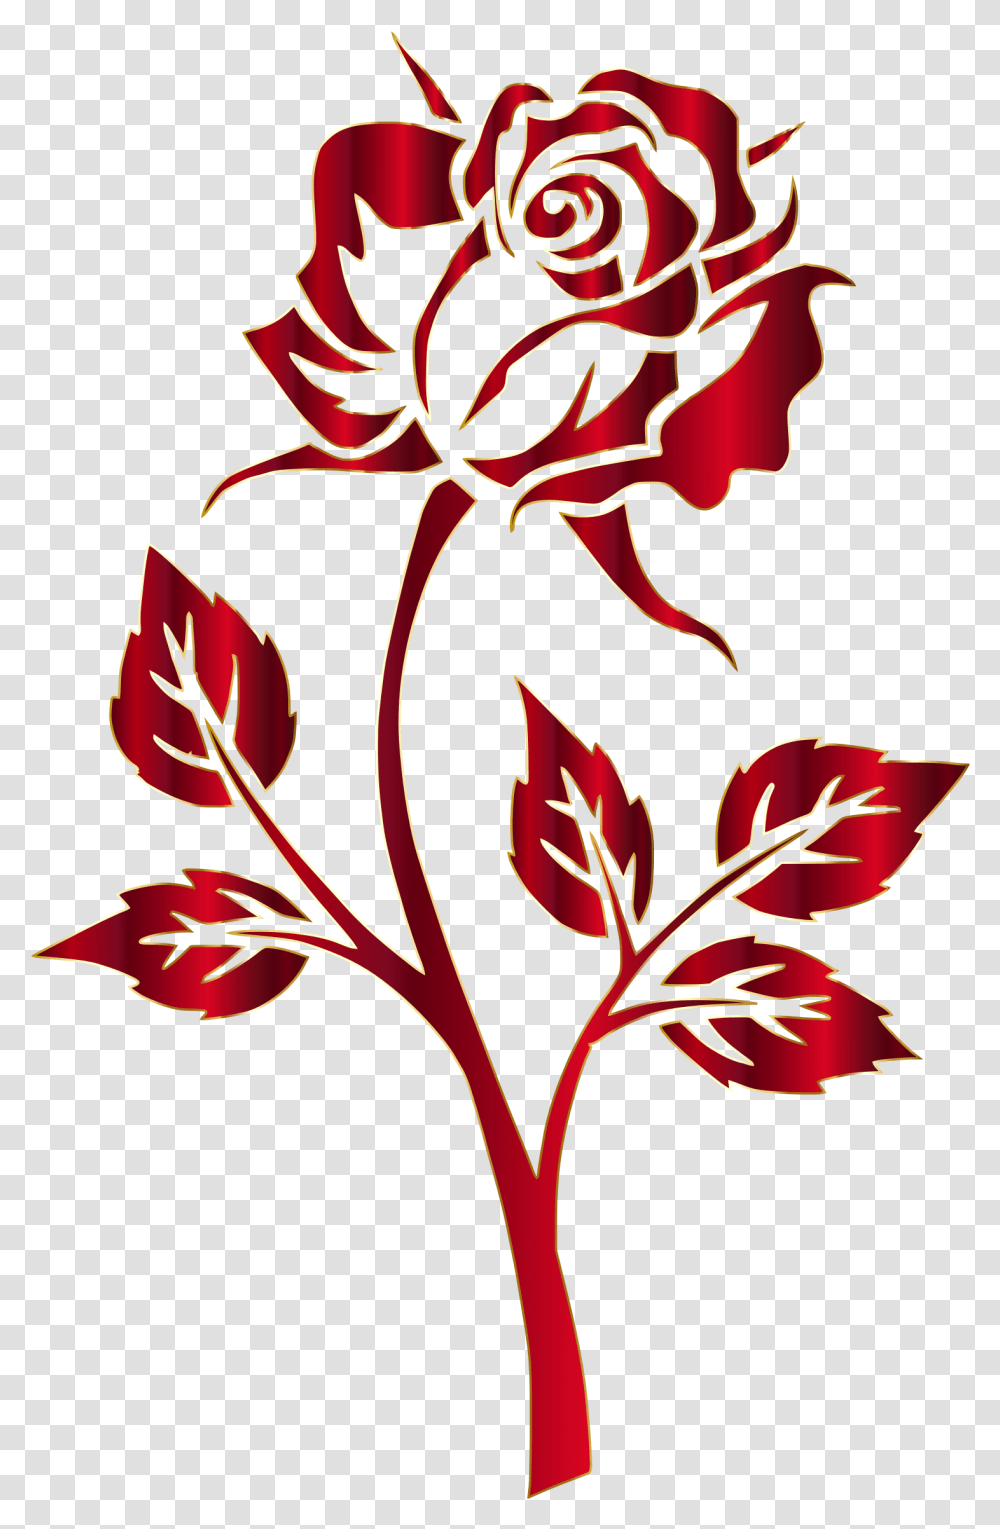 Crimson Rose Silhouette No Background By Gdj Flower Clipart Black And White, Graphics, Plant, Floral Design, Pattern Transparent Png